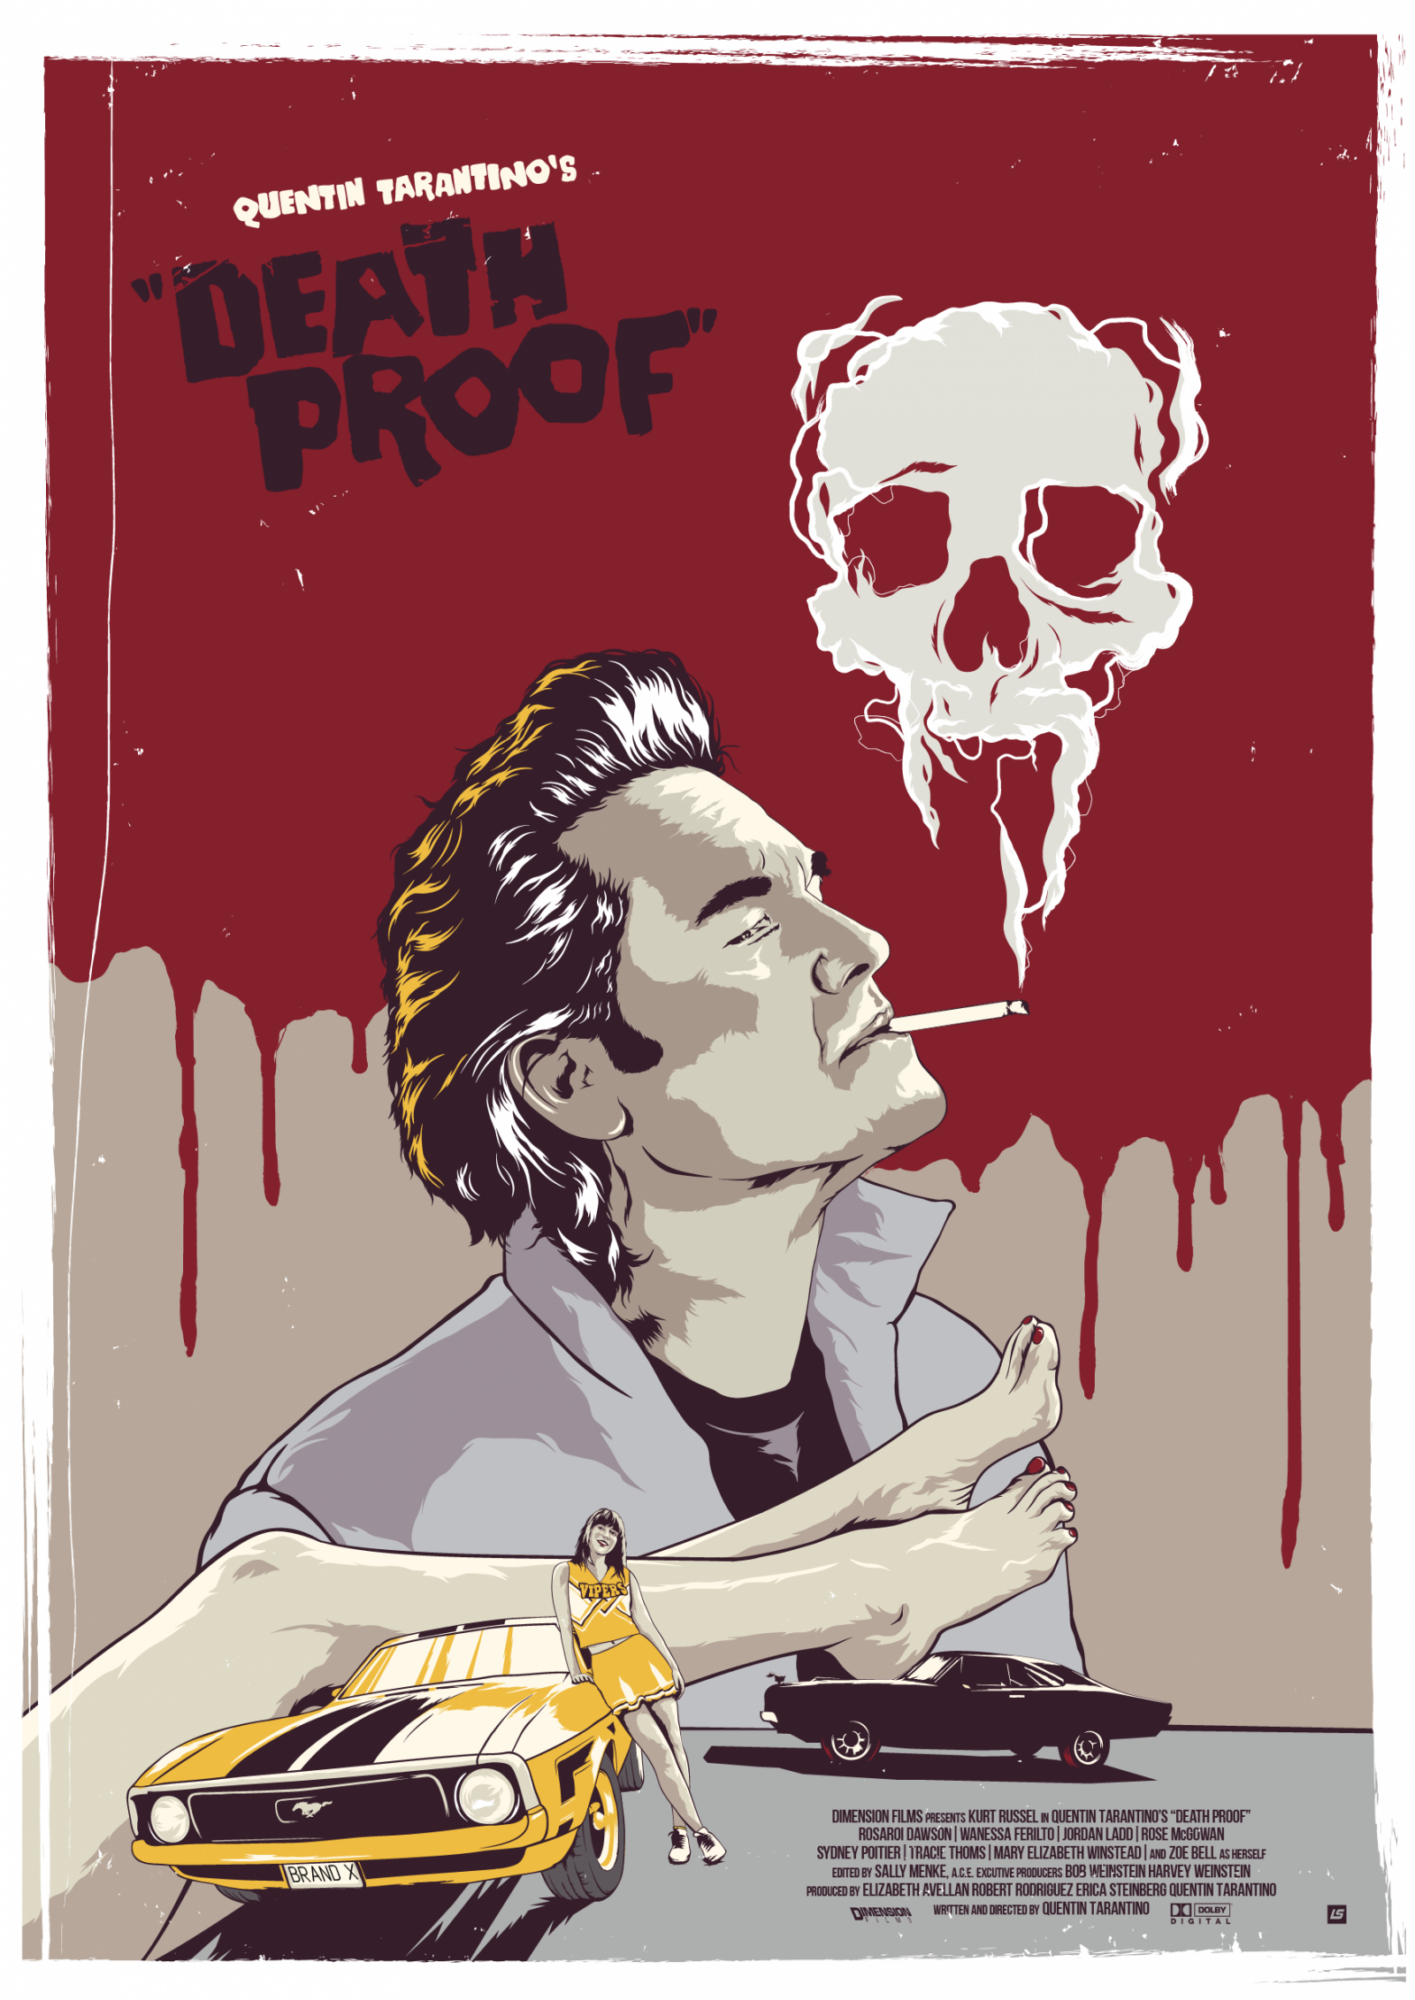 2007 Death Proof